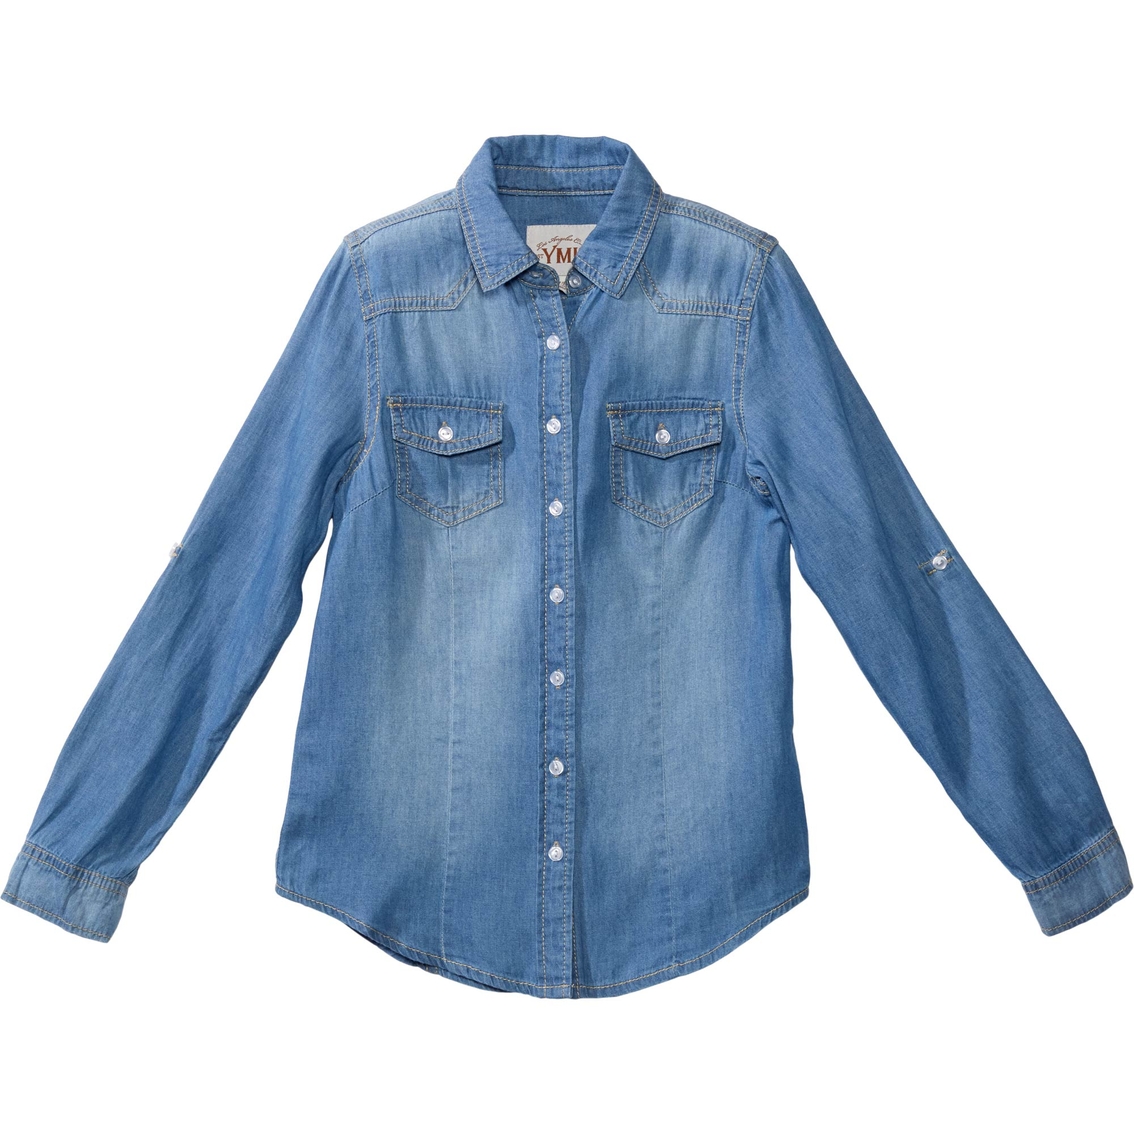 YMI Girls Roll Tab Chambray Top - Image 3 of 3